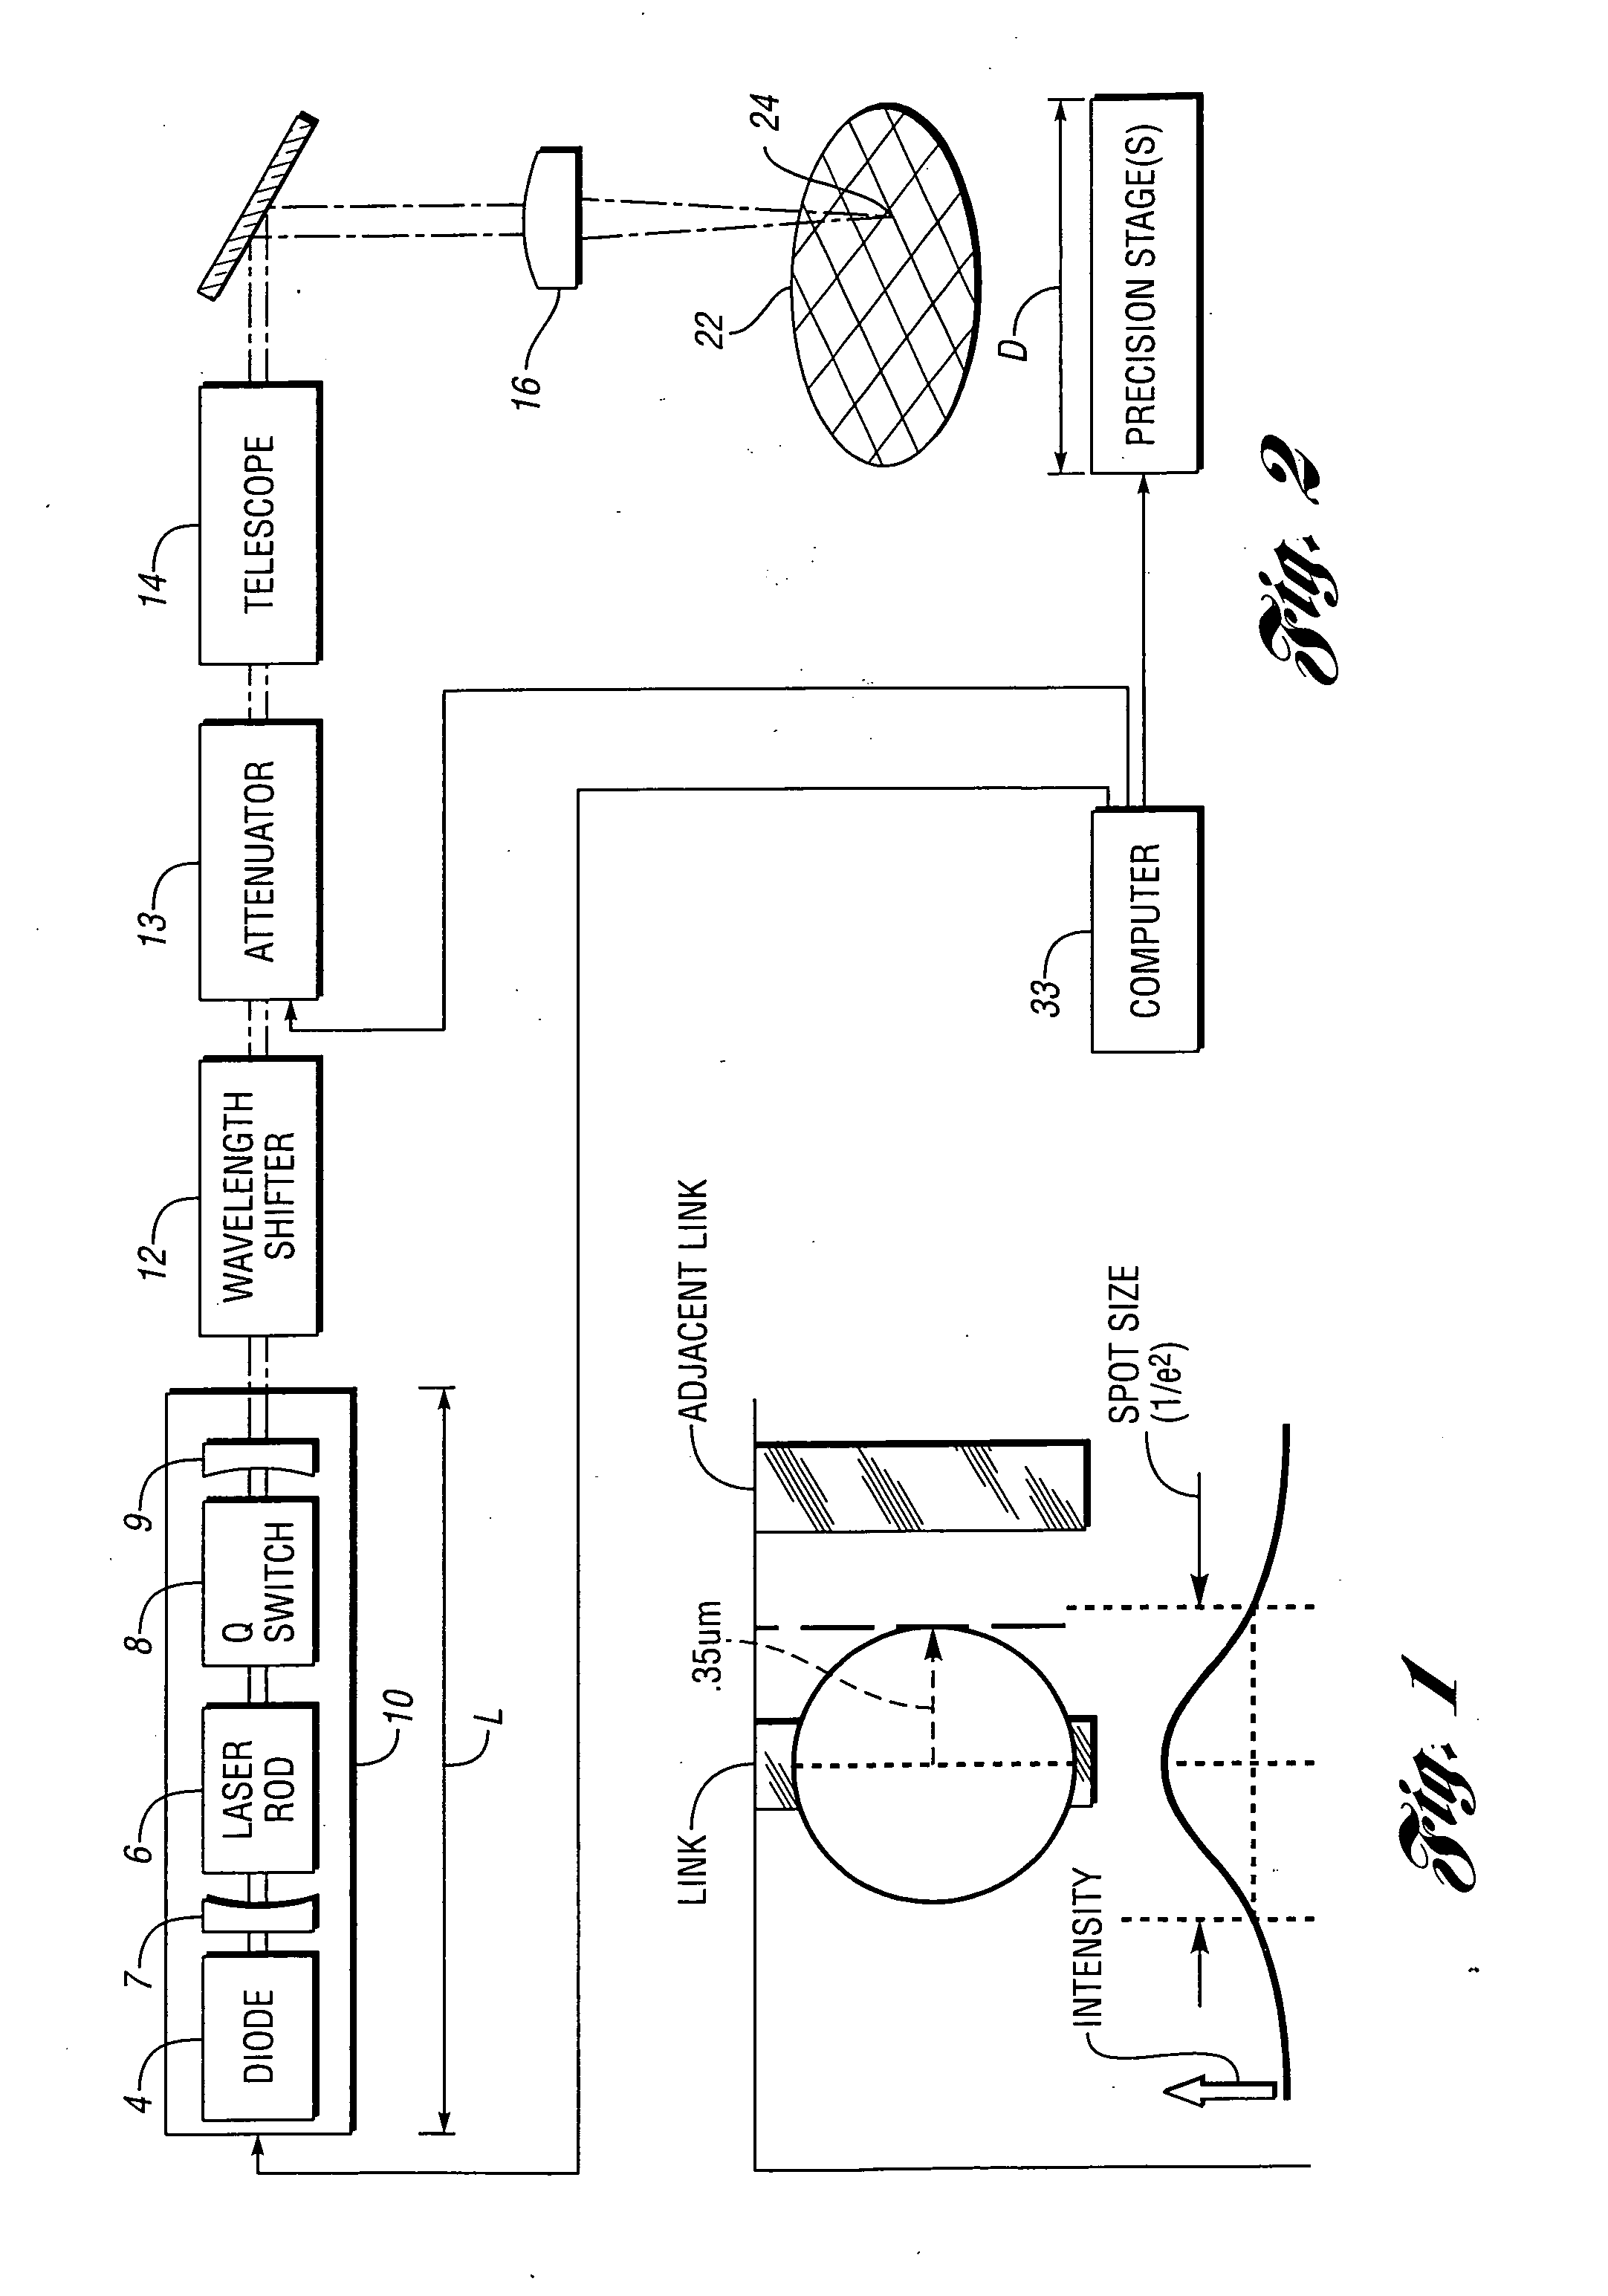 Laser-based method and system for processing a multi-material device having conductive link structures